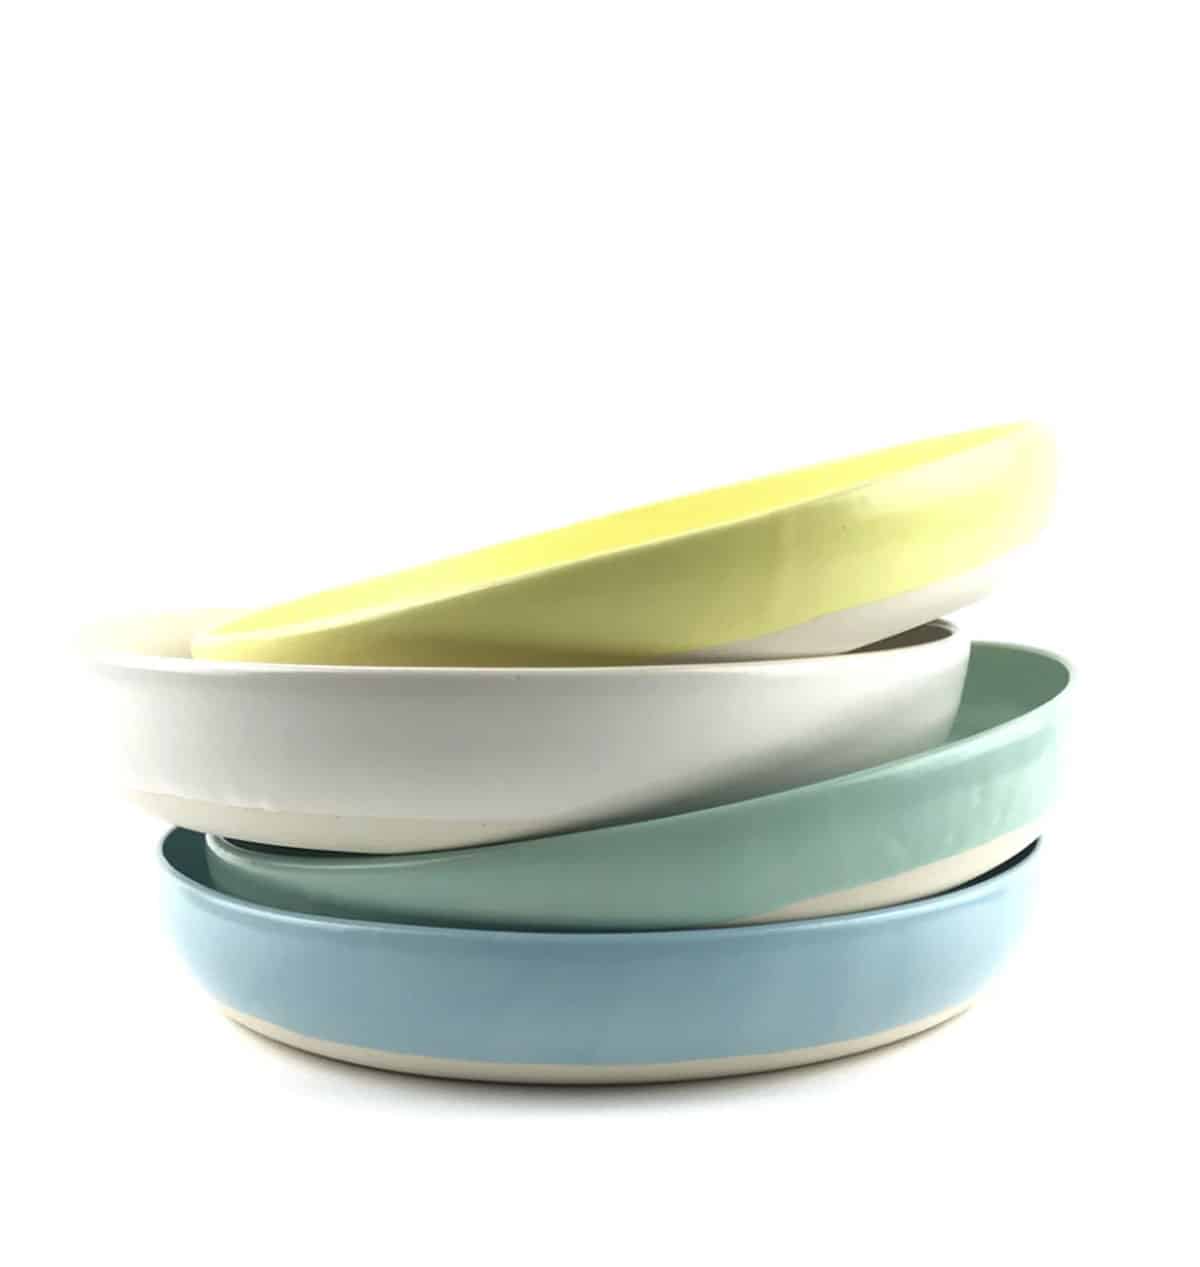 Stack of 4 colored flat bowls.